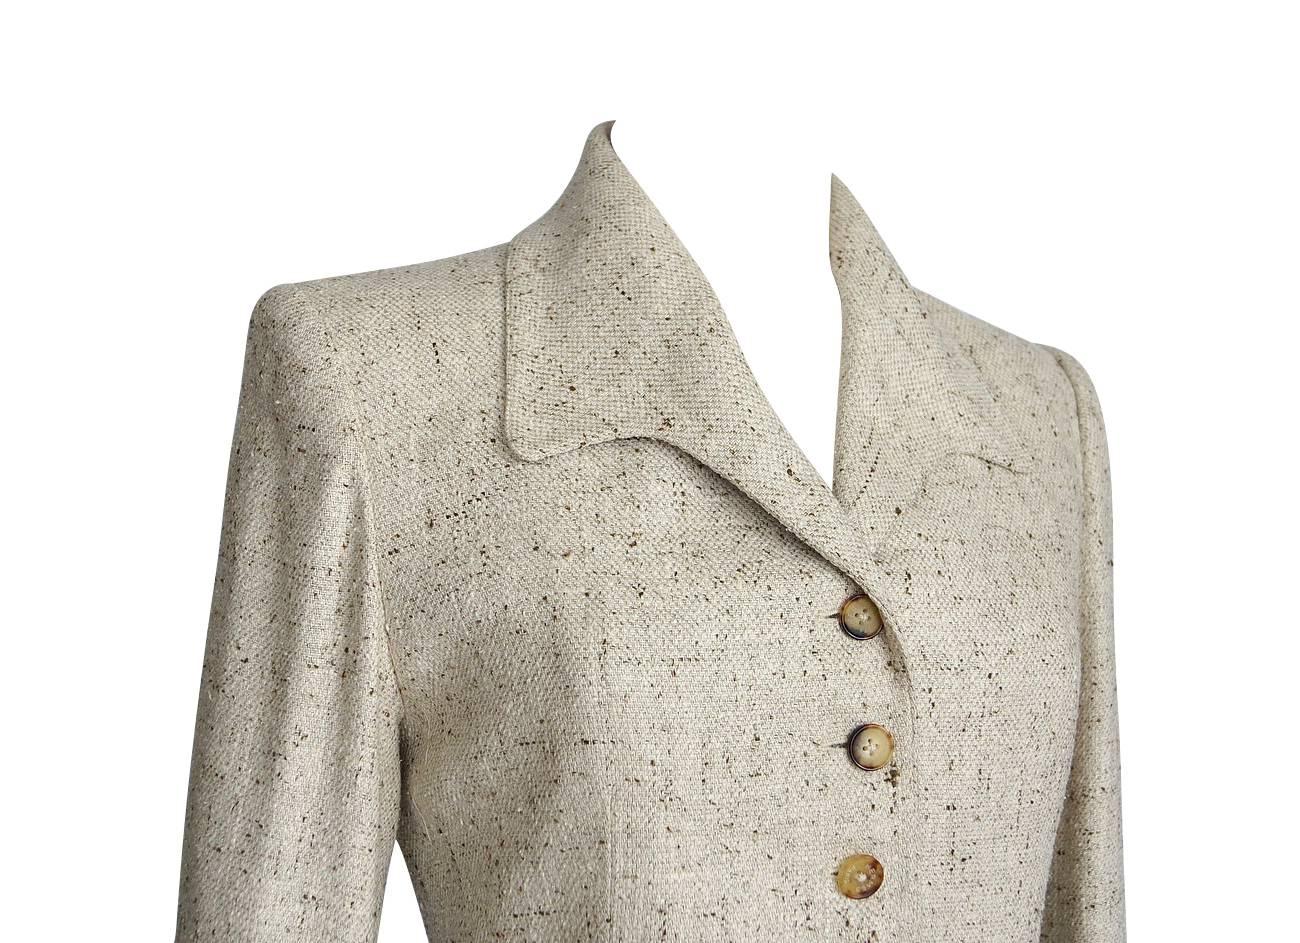 Talk about a collectors piece from Hermes.
Raw silk in an oatmeal colour with brown flecks make this a divine year round jacket.
6 button single breast magnificently shaped jacket.
Bbeautifully shaped lapel and jacket appear to be one running piece